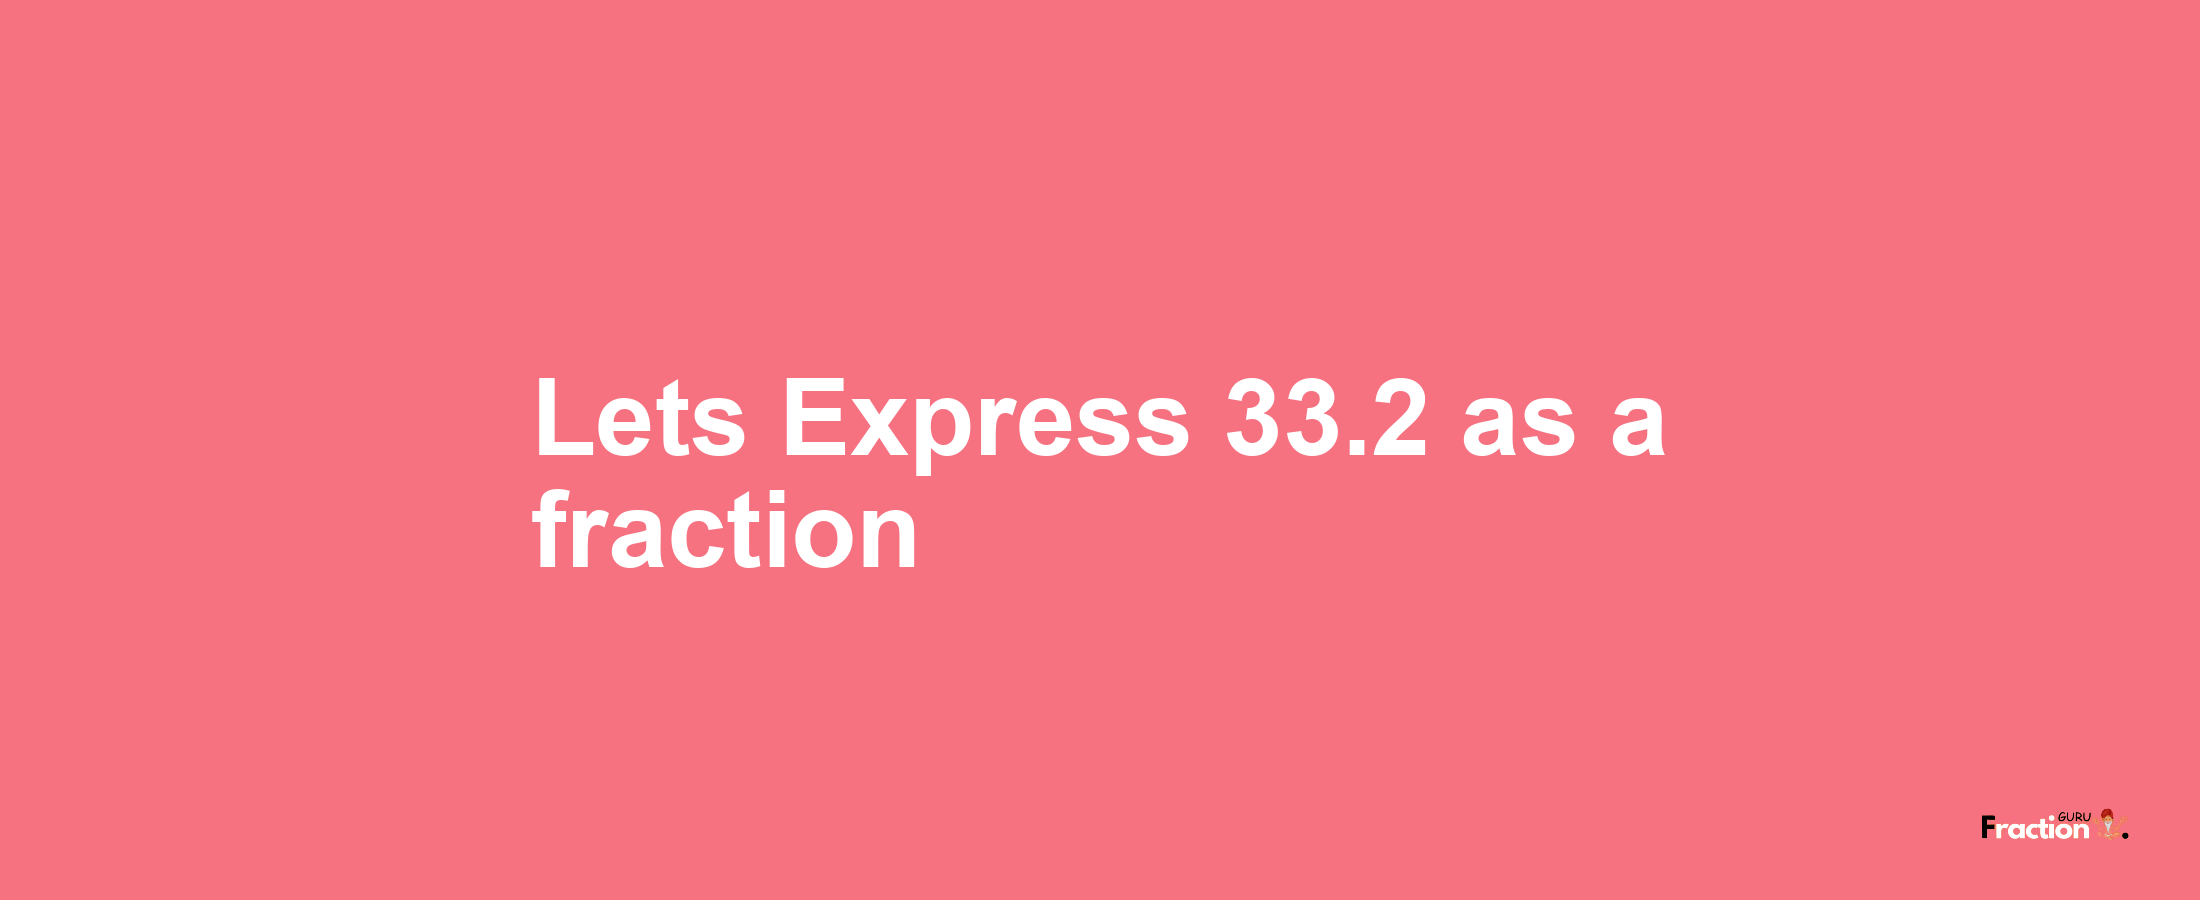 Lets Express 33.2 as afraction